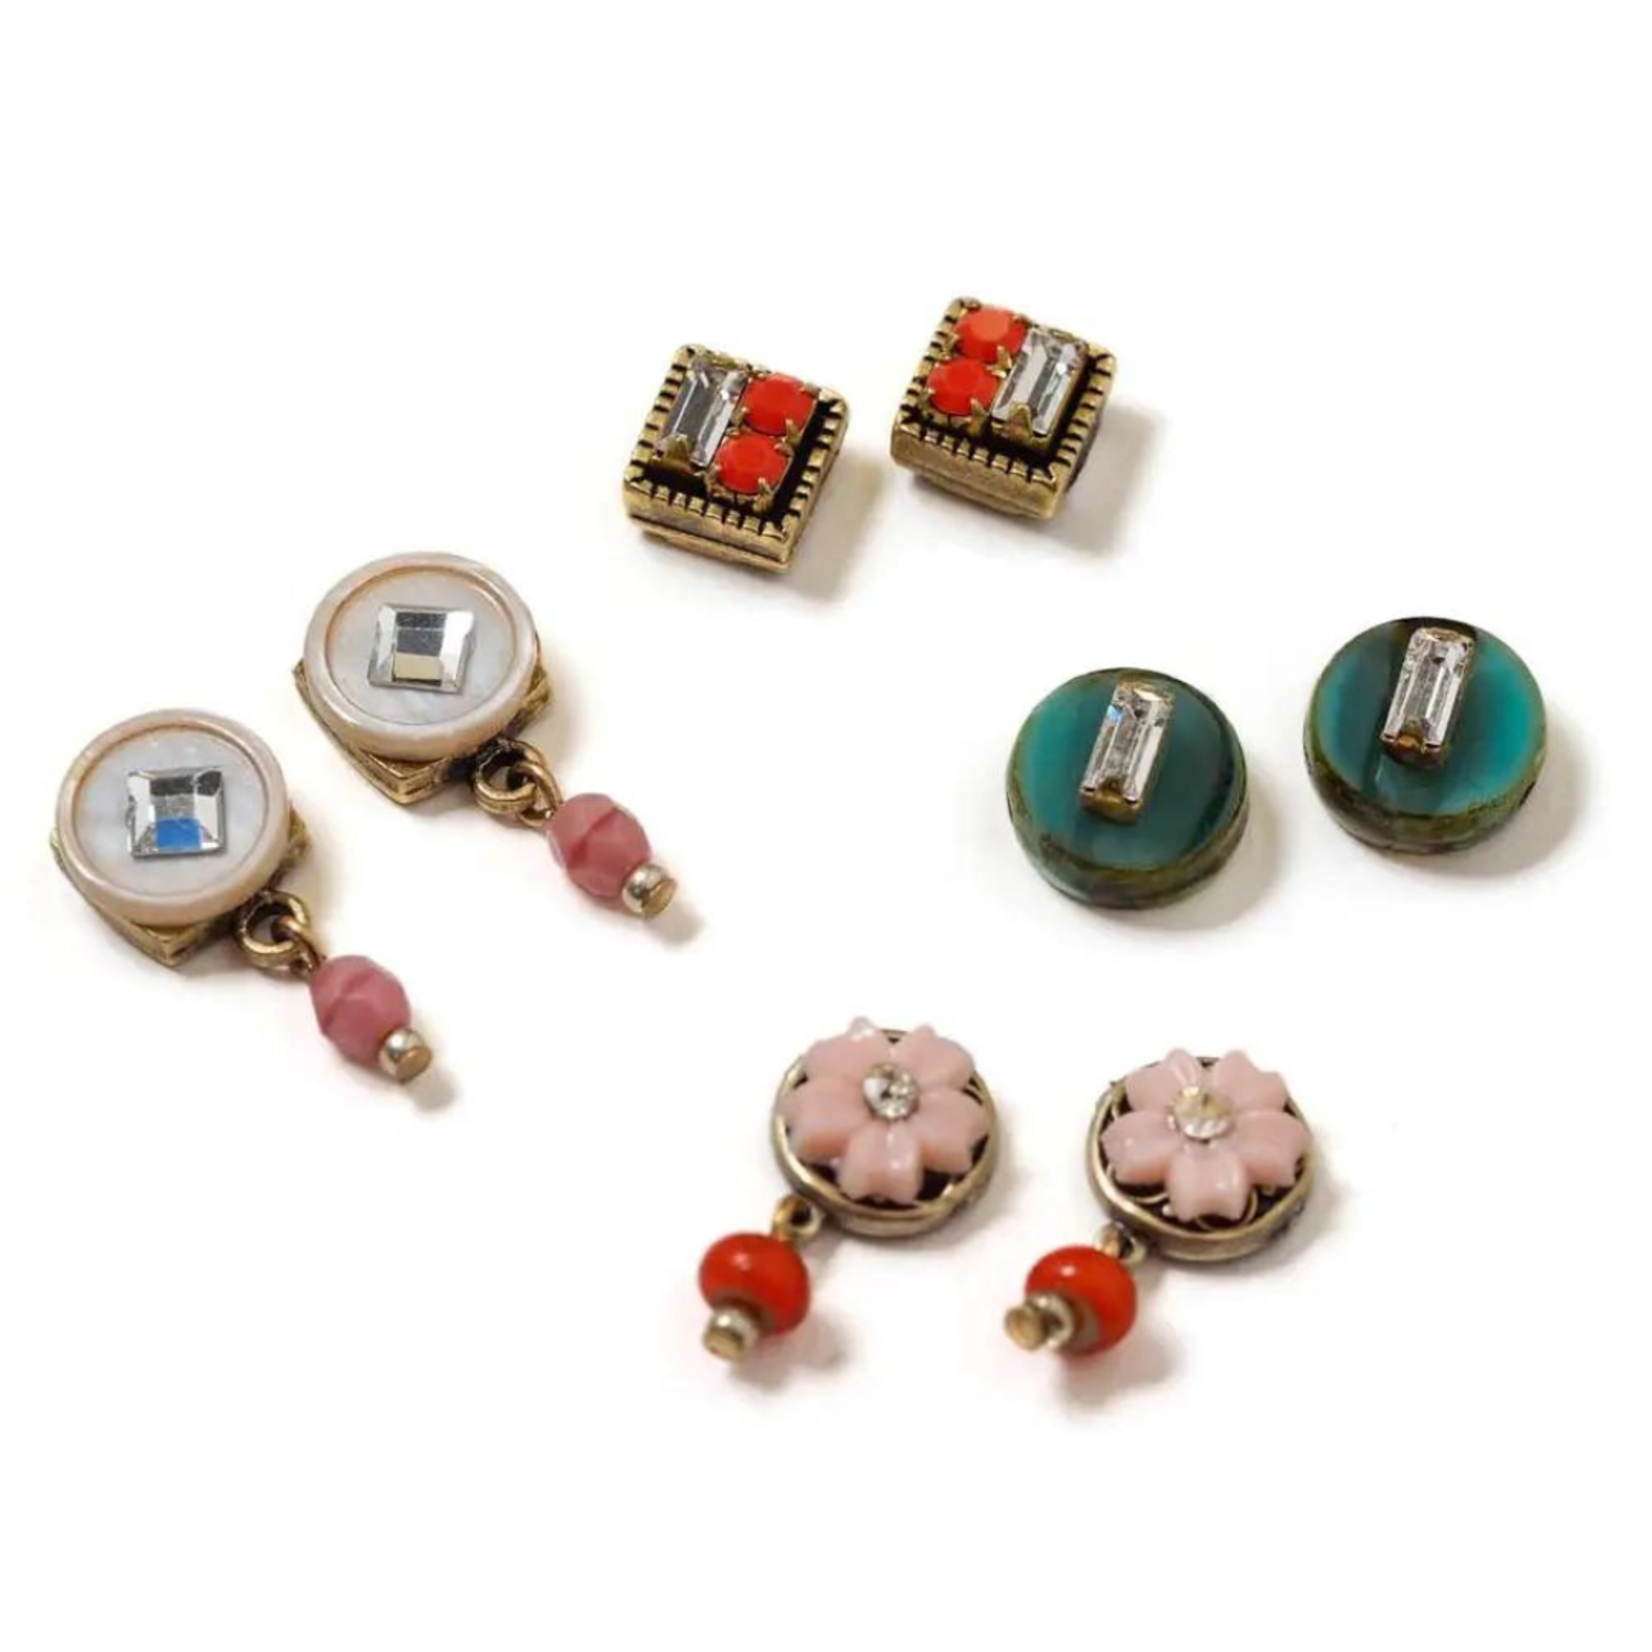 Elements, Jill Schwartz Valeria Pink and Teal With Crystal Accents Stud Earrings Set